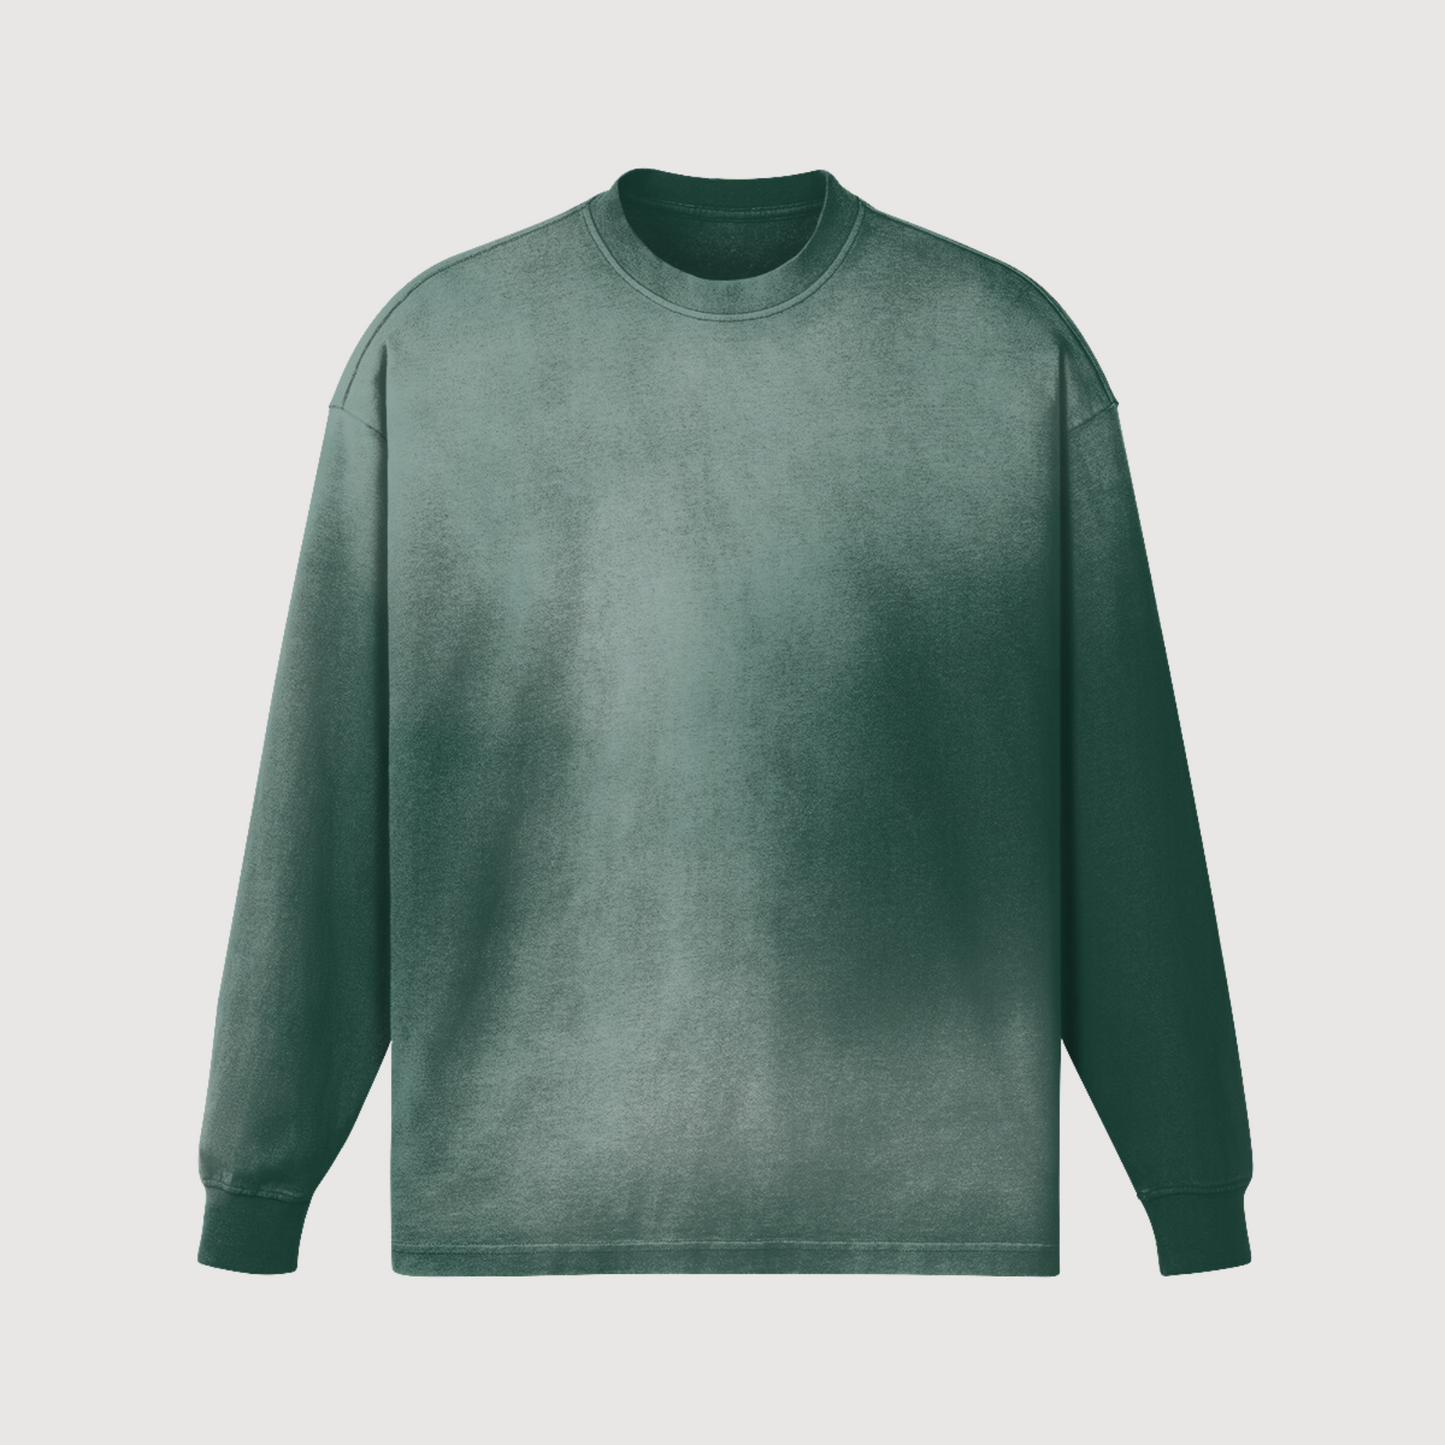 luxury streetwear: drop shoulder oversized crewneck, green washed out/faded/dyed, mens and womens oversized luxury streetwear